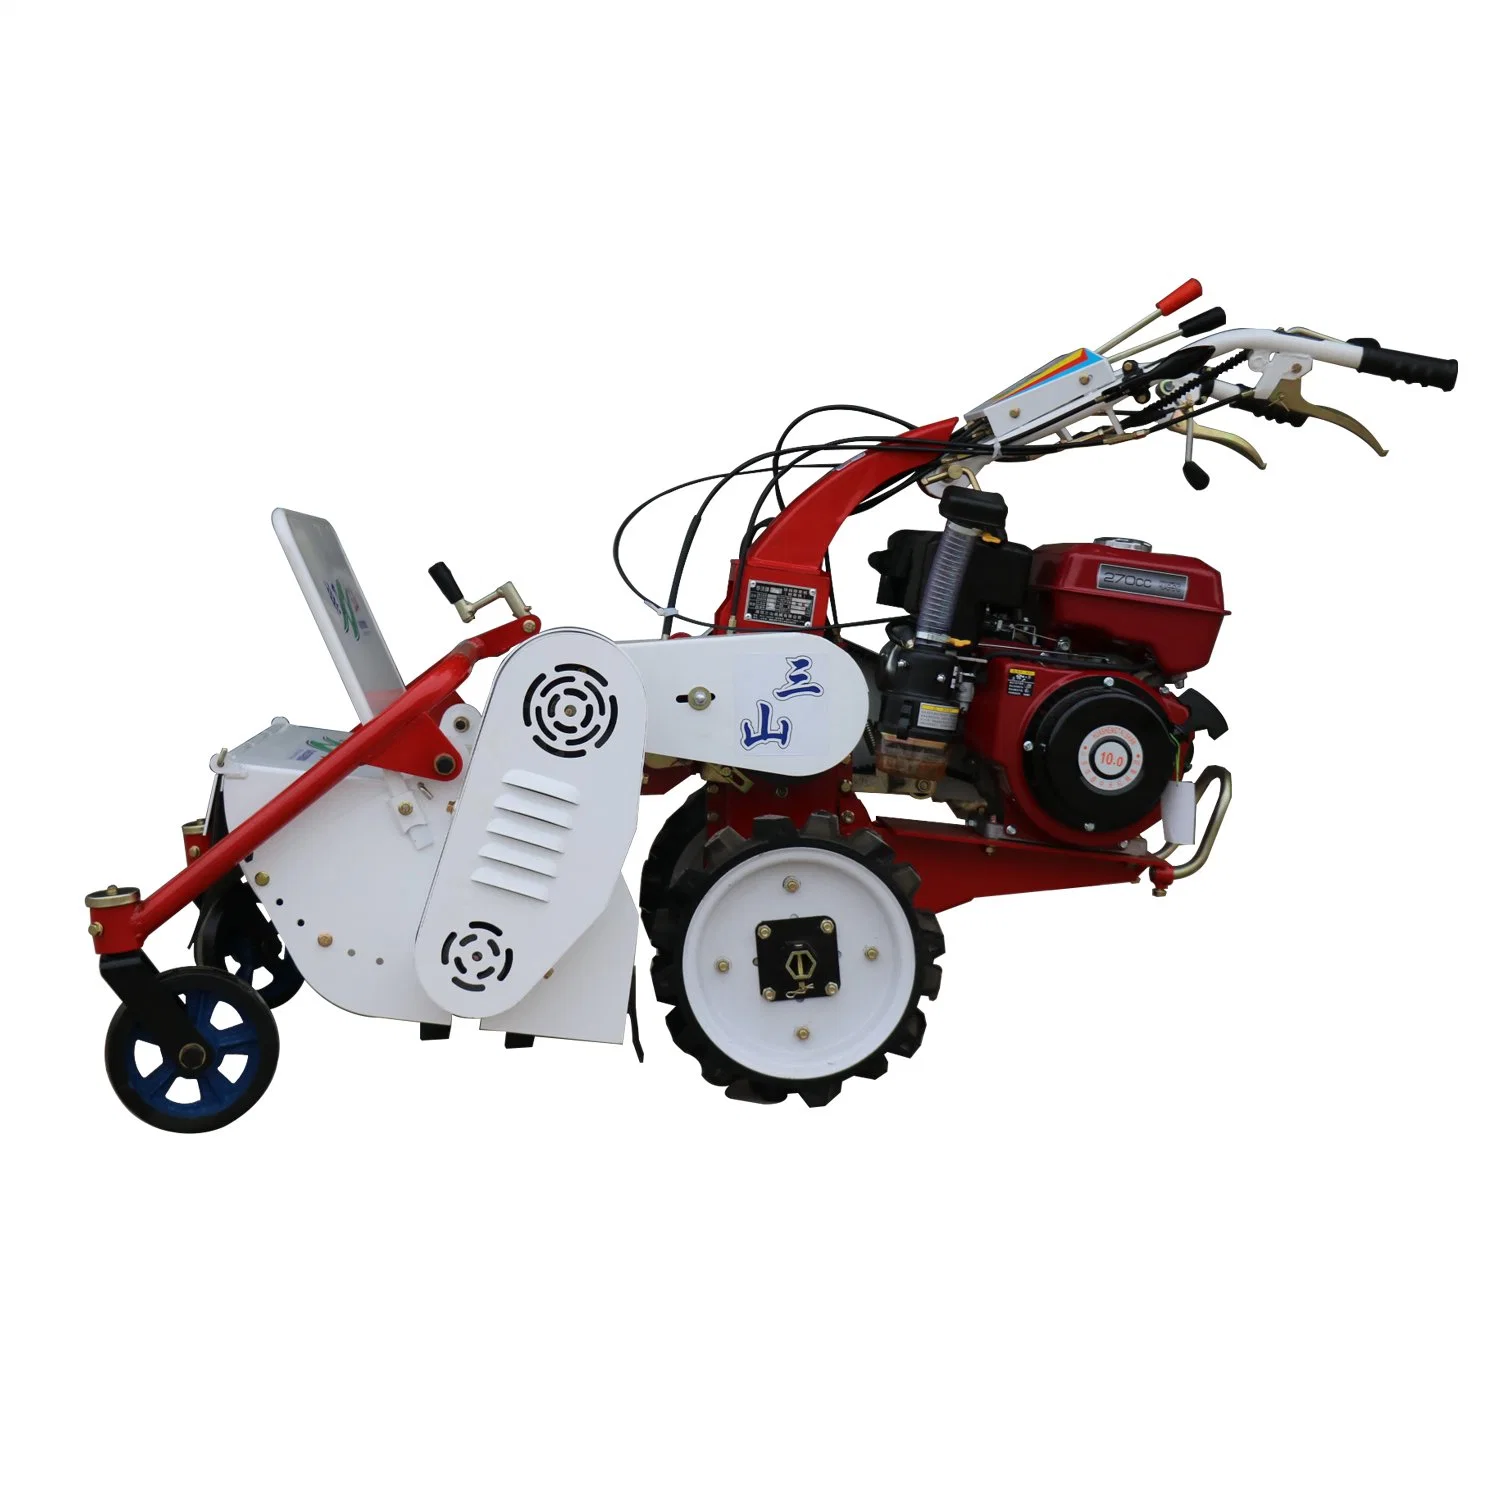 Lawn Mower on a Tractor Robot Lawn Mower with Remote Control